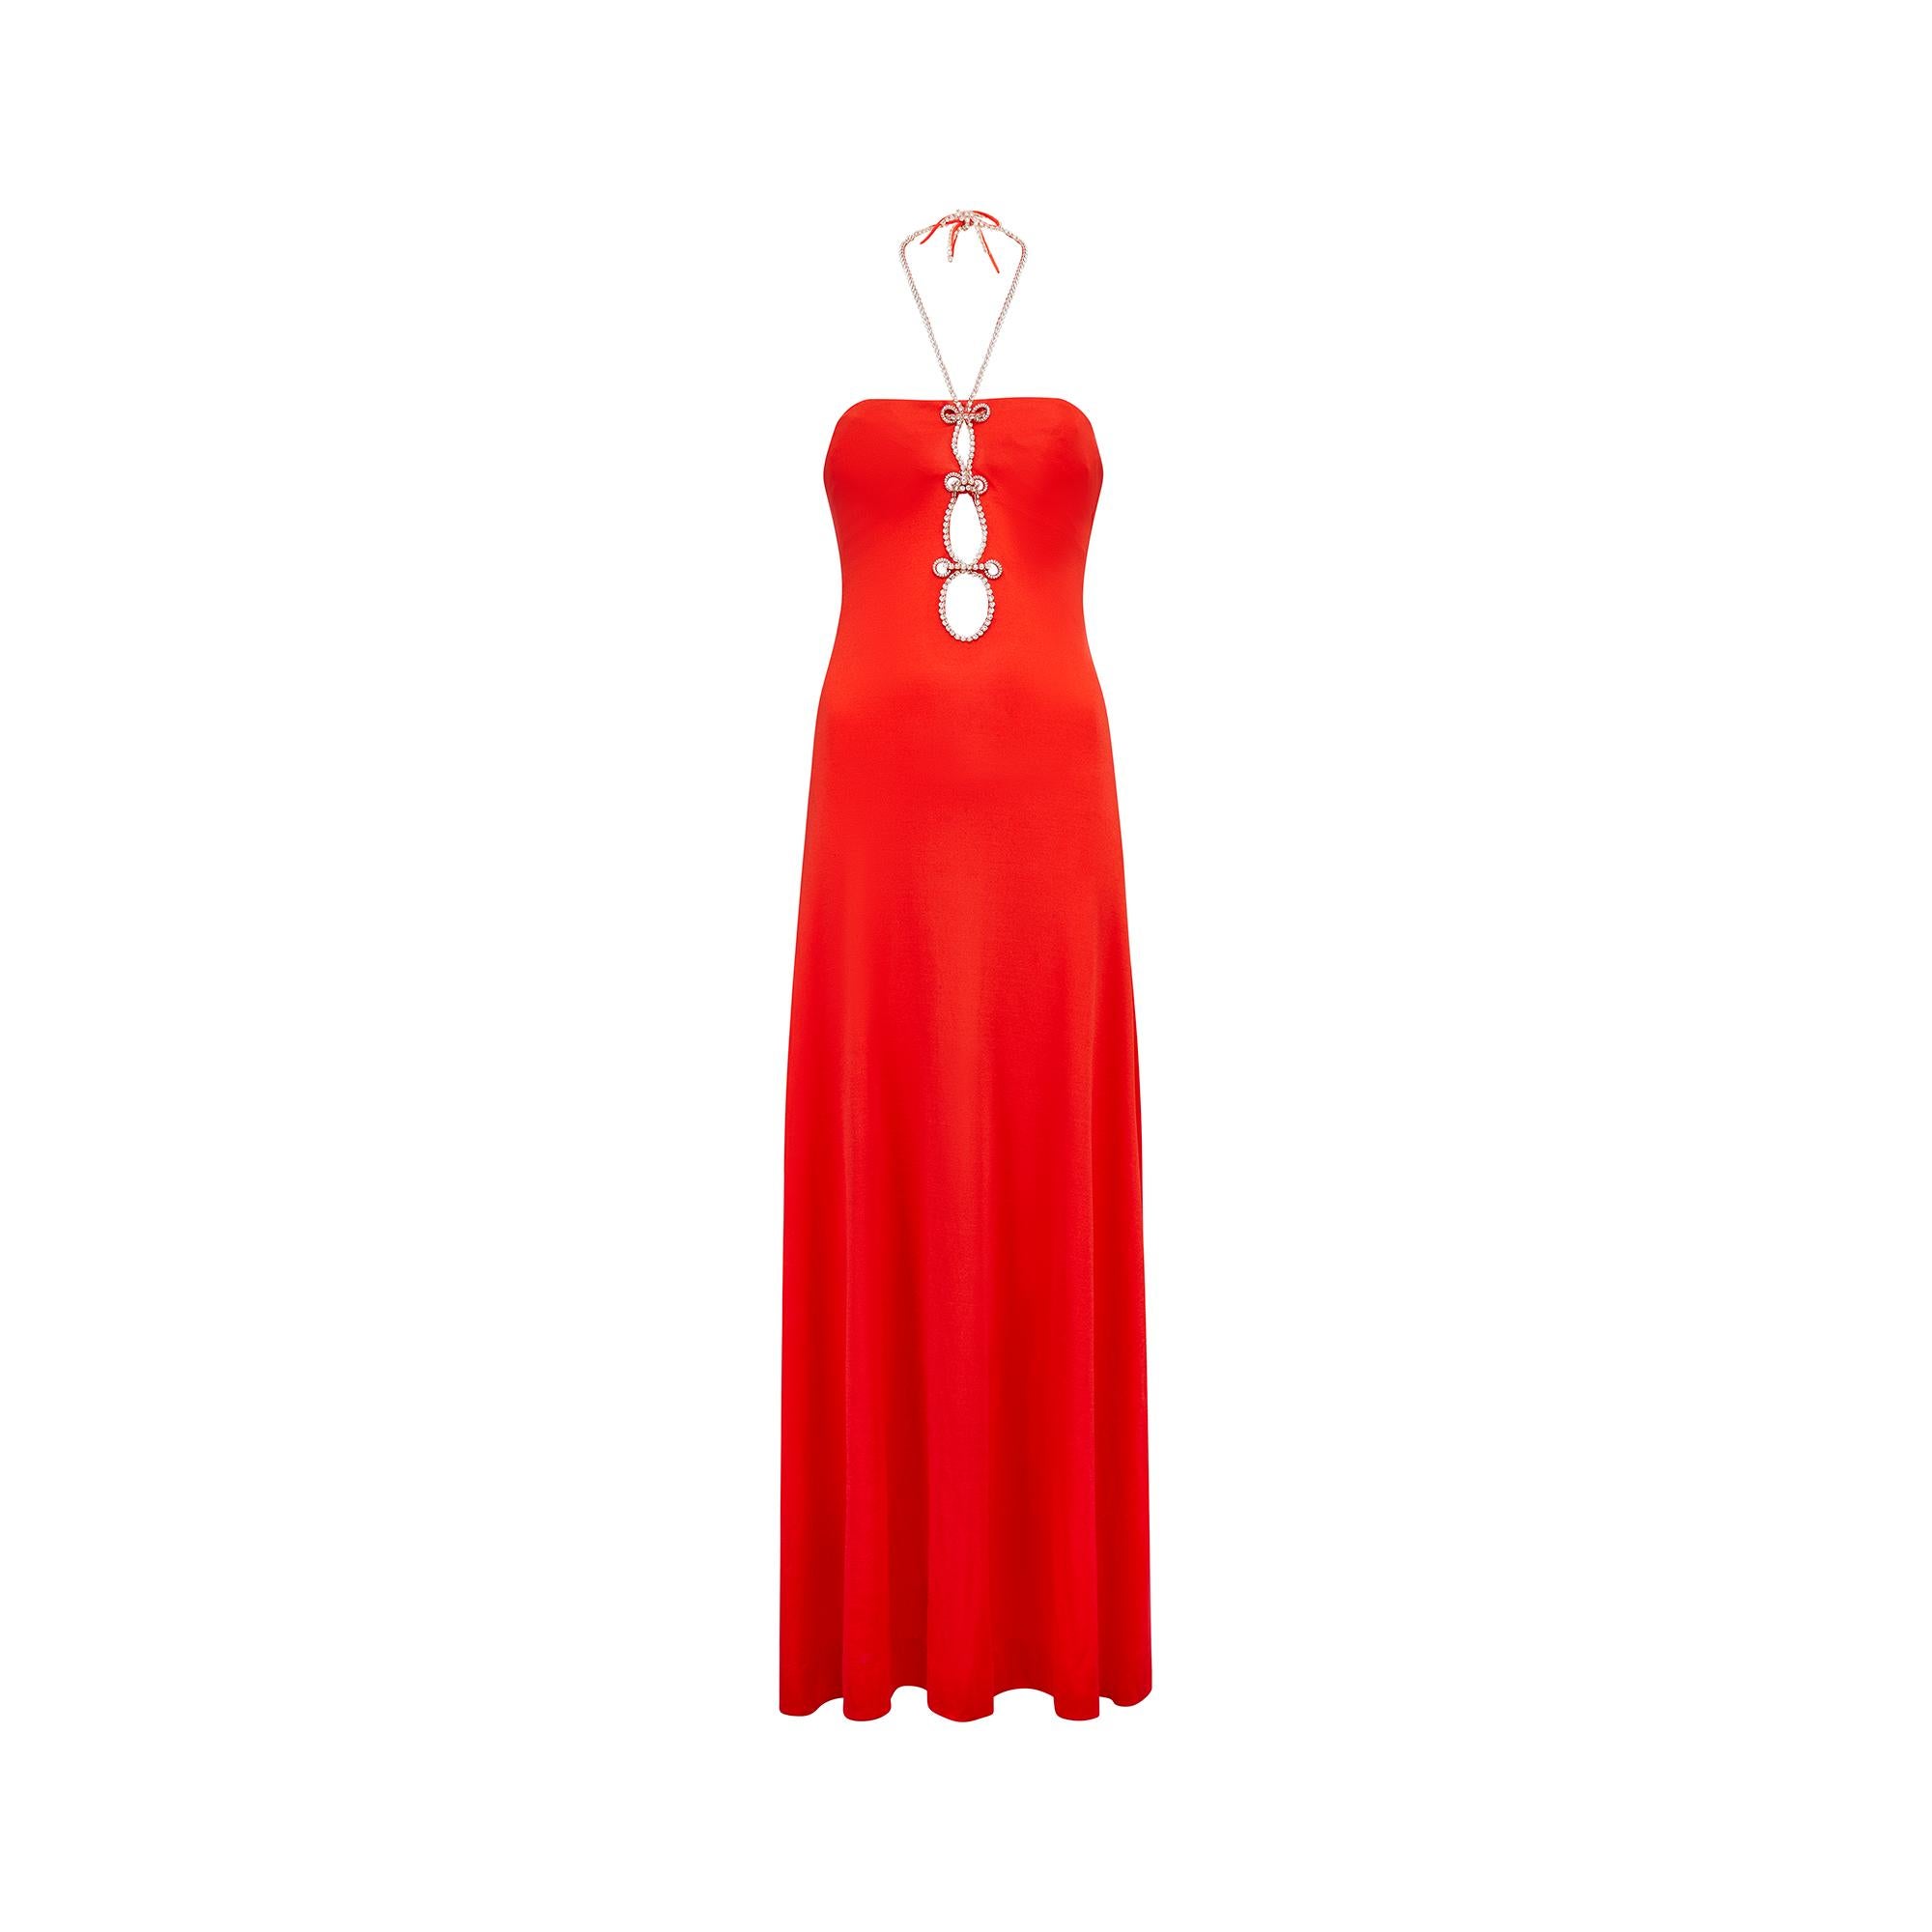 Fabulous 1970s red jersey maxi dress by Loris Azzaro featuring a signature deep keyhole detail to the front neckline, embellished with diamanté crystals for a glamorous effect. These continue along the halter neck straps, which are adjustable and